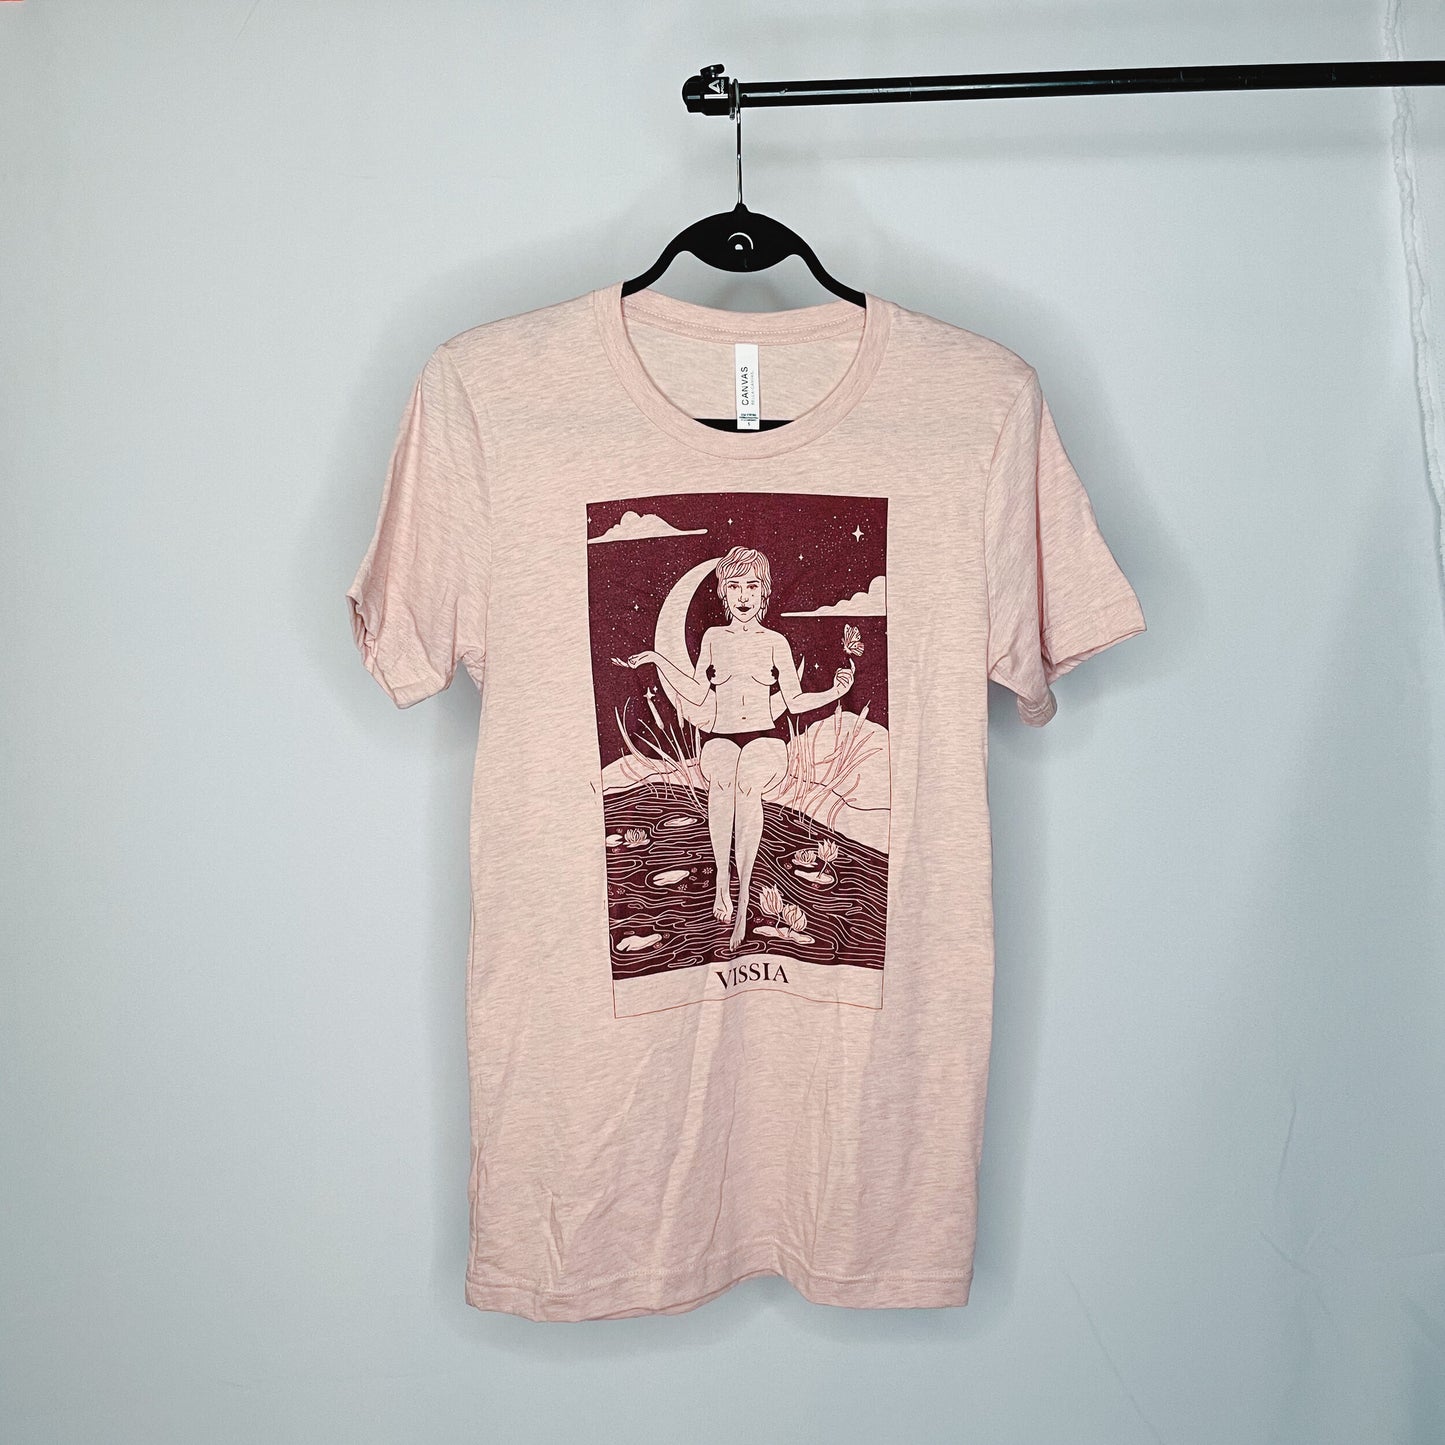 heather peach t-shirt with rusty red illustration; the illustration is in the style of a tarot card and shows an unclothed woman sitting on the banks of a river; a butterfly hovers above her left hand and her right hand is extended; a crescent moon hangs against a dark starry sky